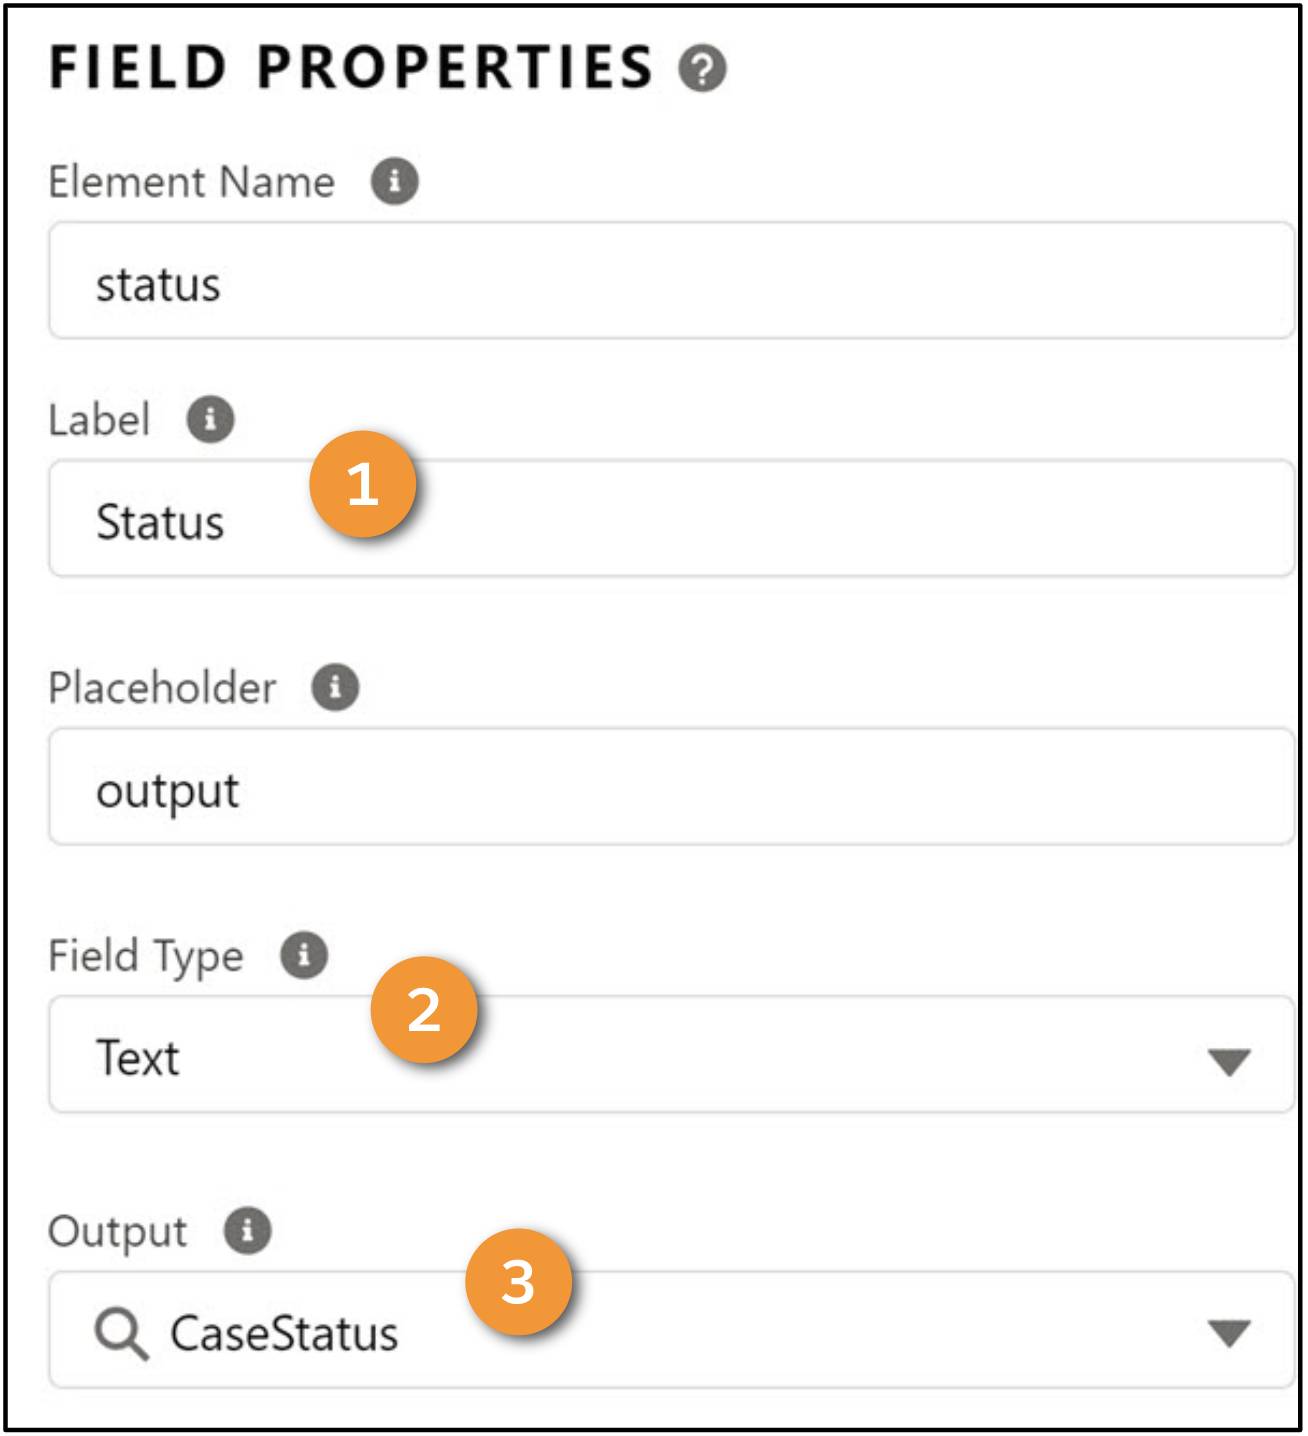 The Status field element properties include the Field Type, which is set as Text, and the CaseStatus, which is set as Output.